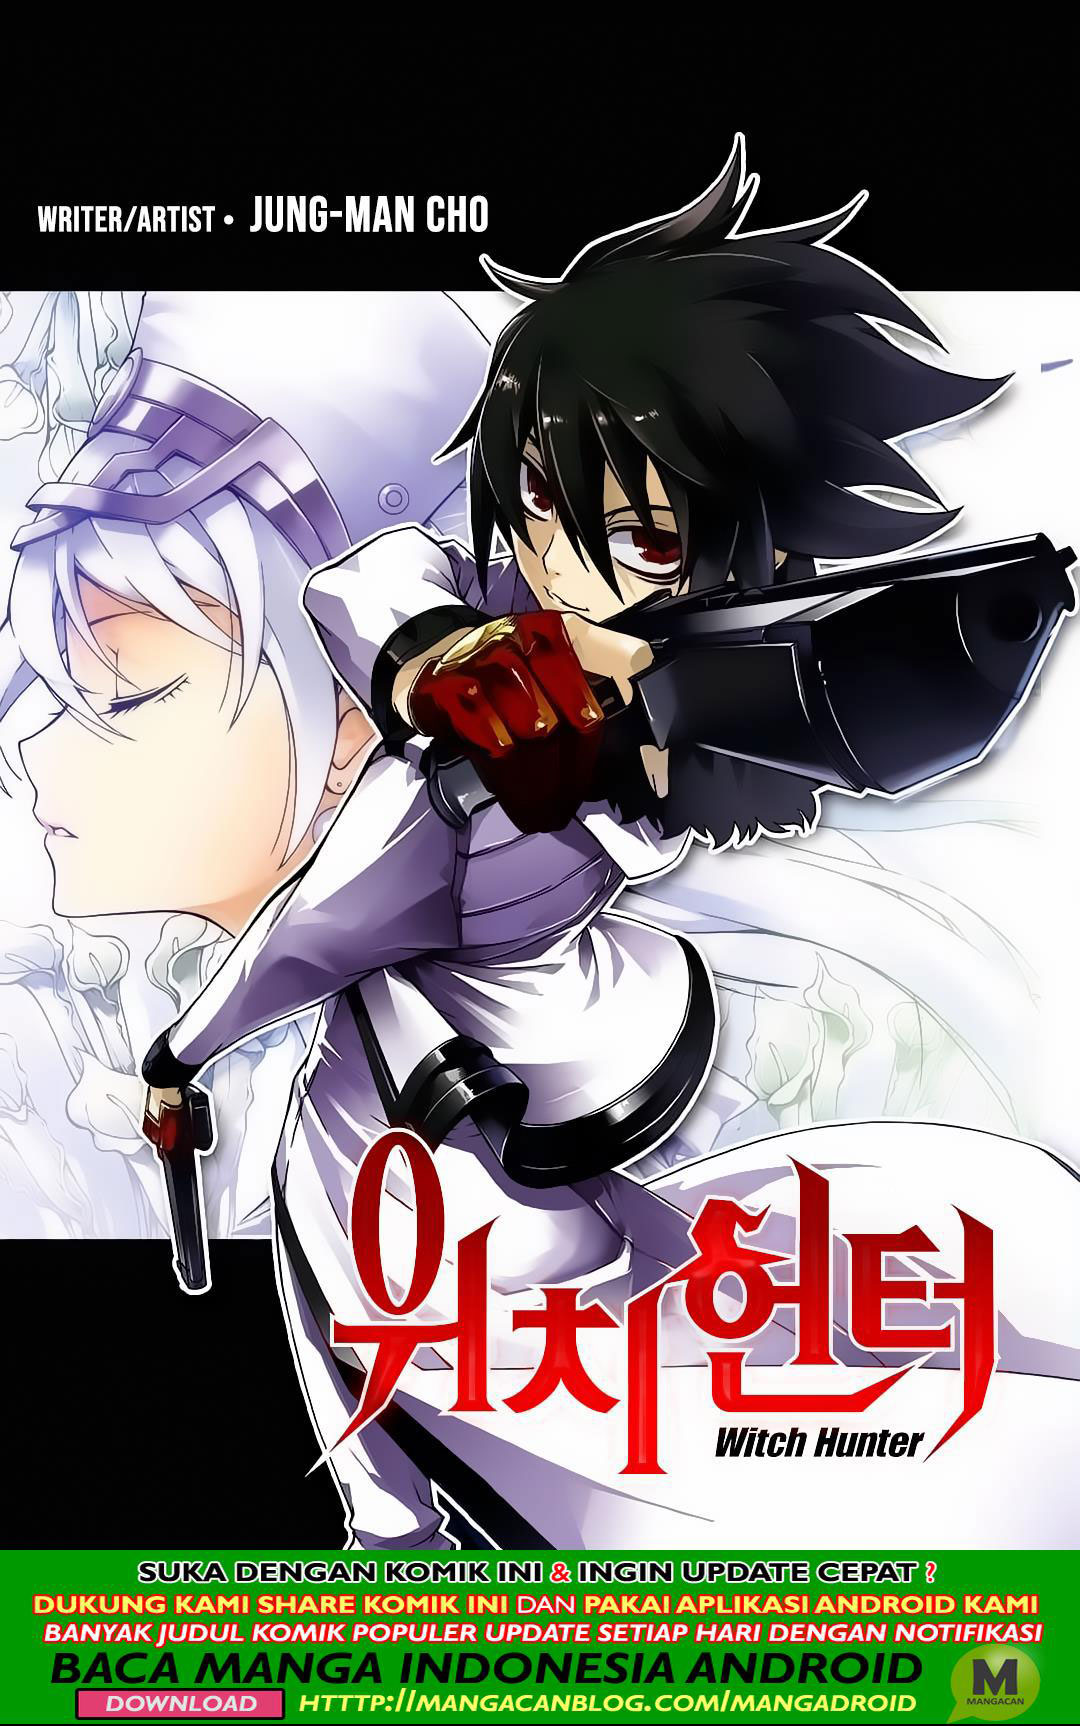 Witch Hunter Chapter 214